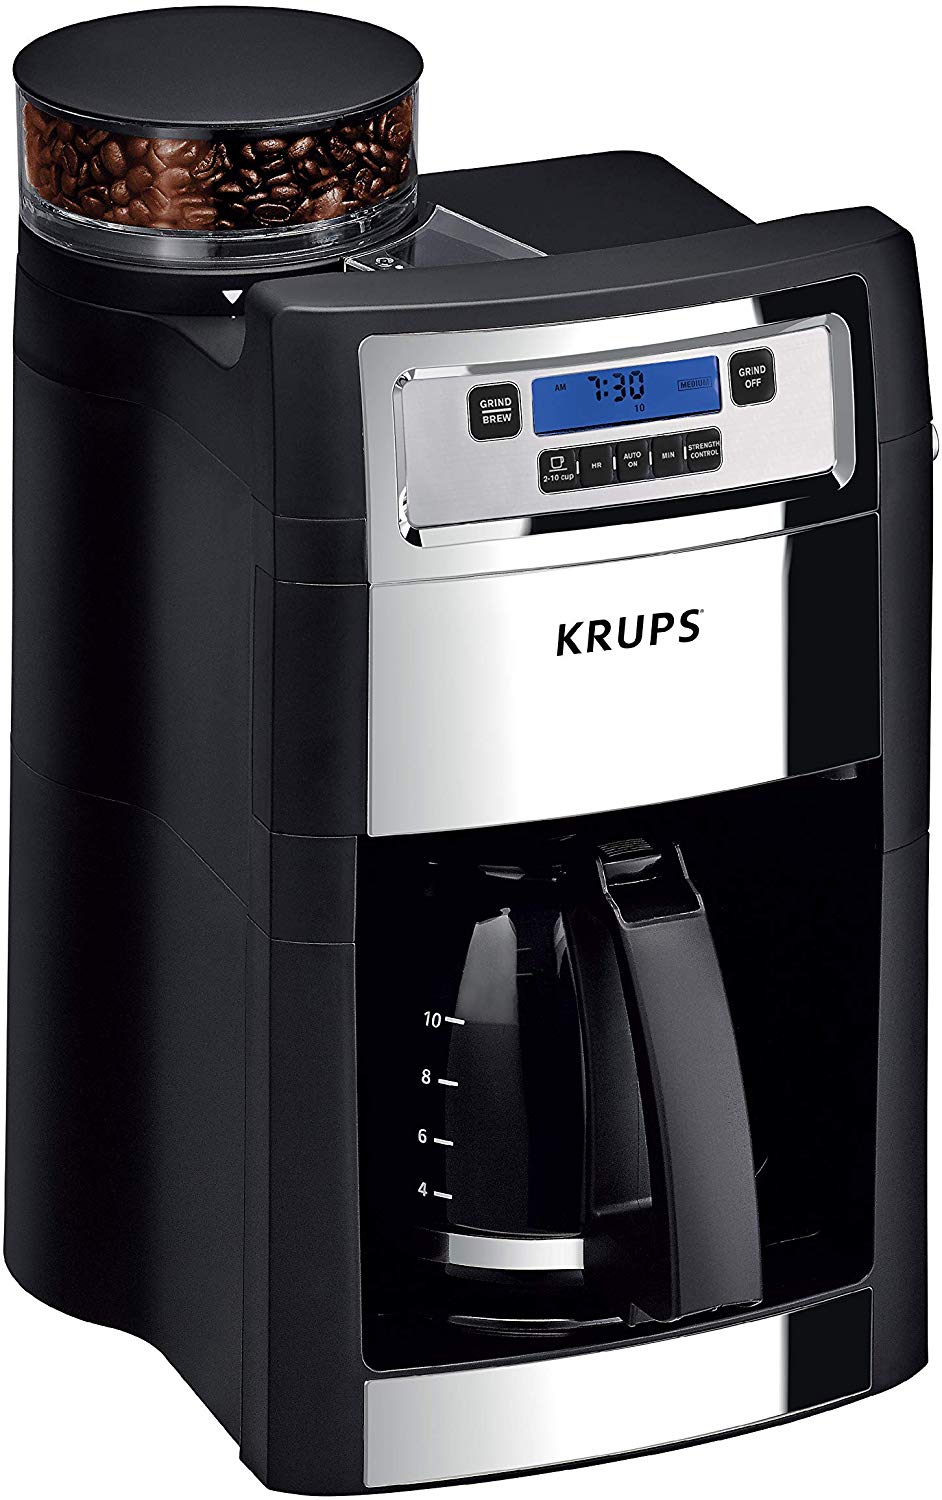 KRUPS KM785D50 Grind and Brew Review